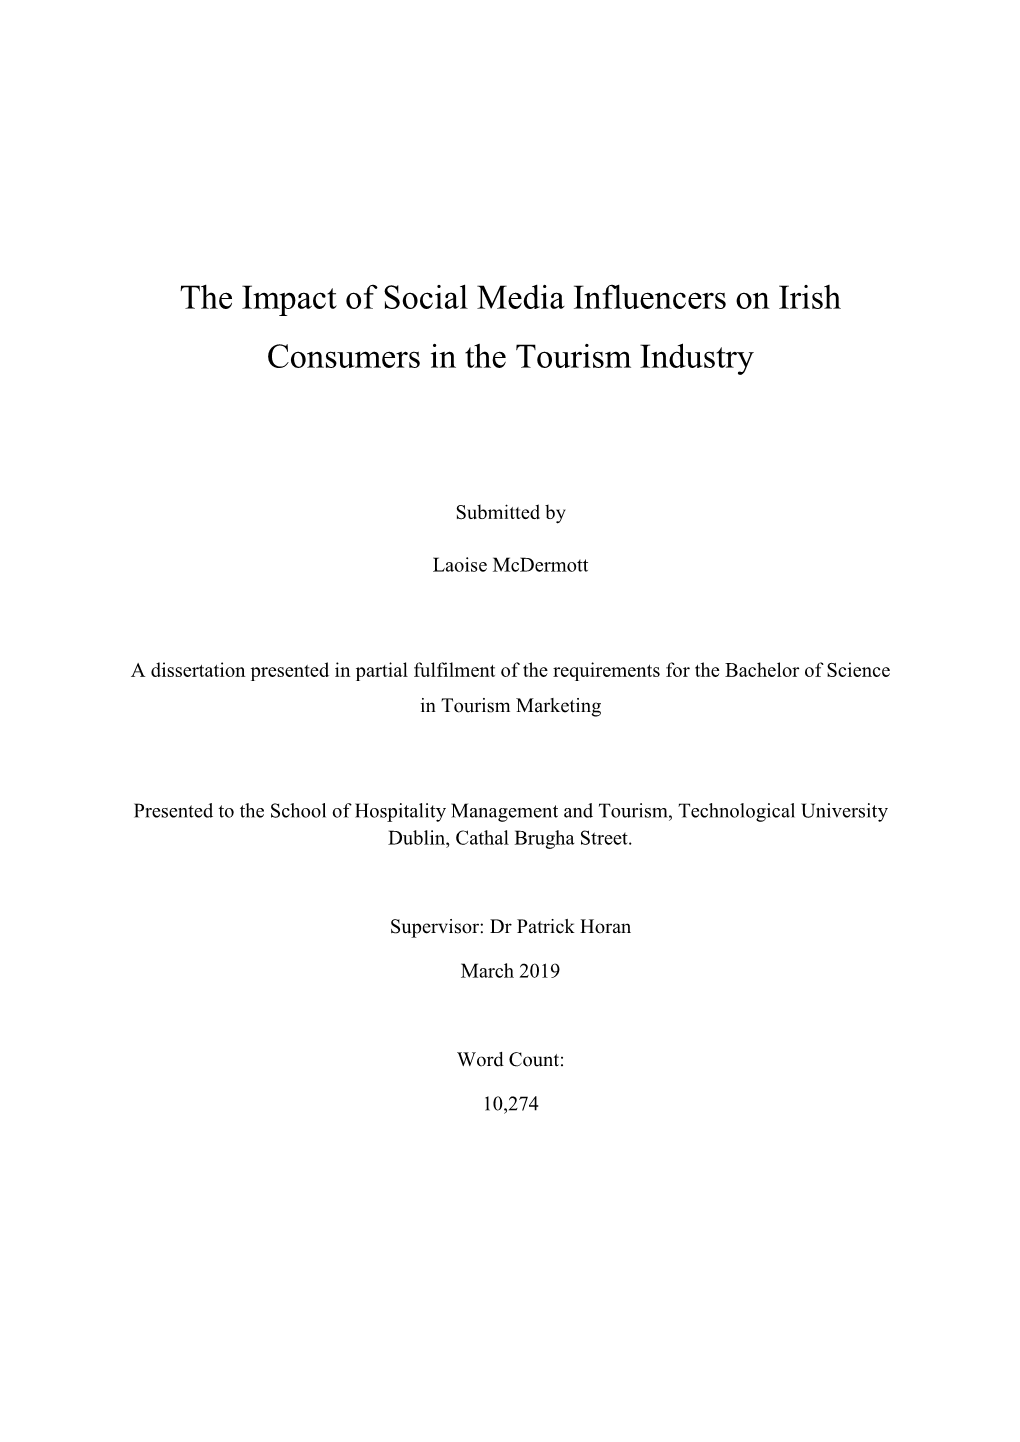 The Impact of Social Media Influencers on Irish Consumers in the Tourism Industry